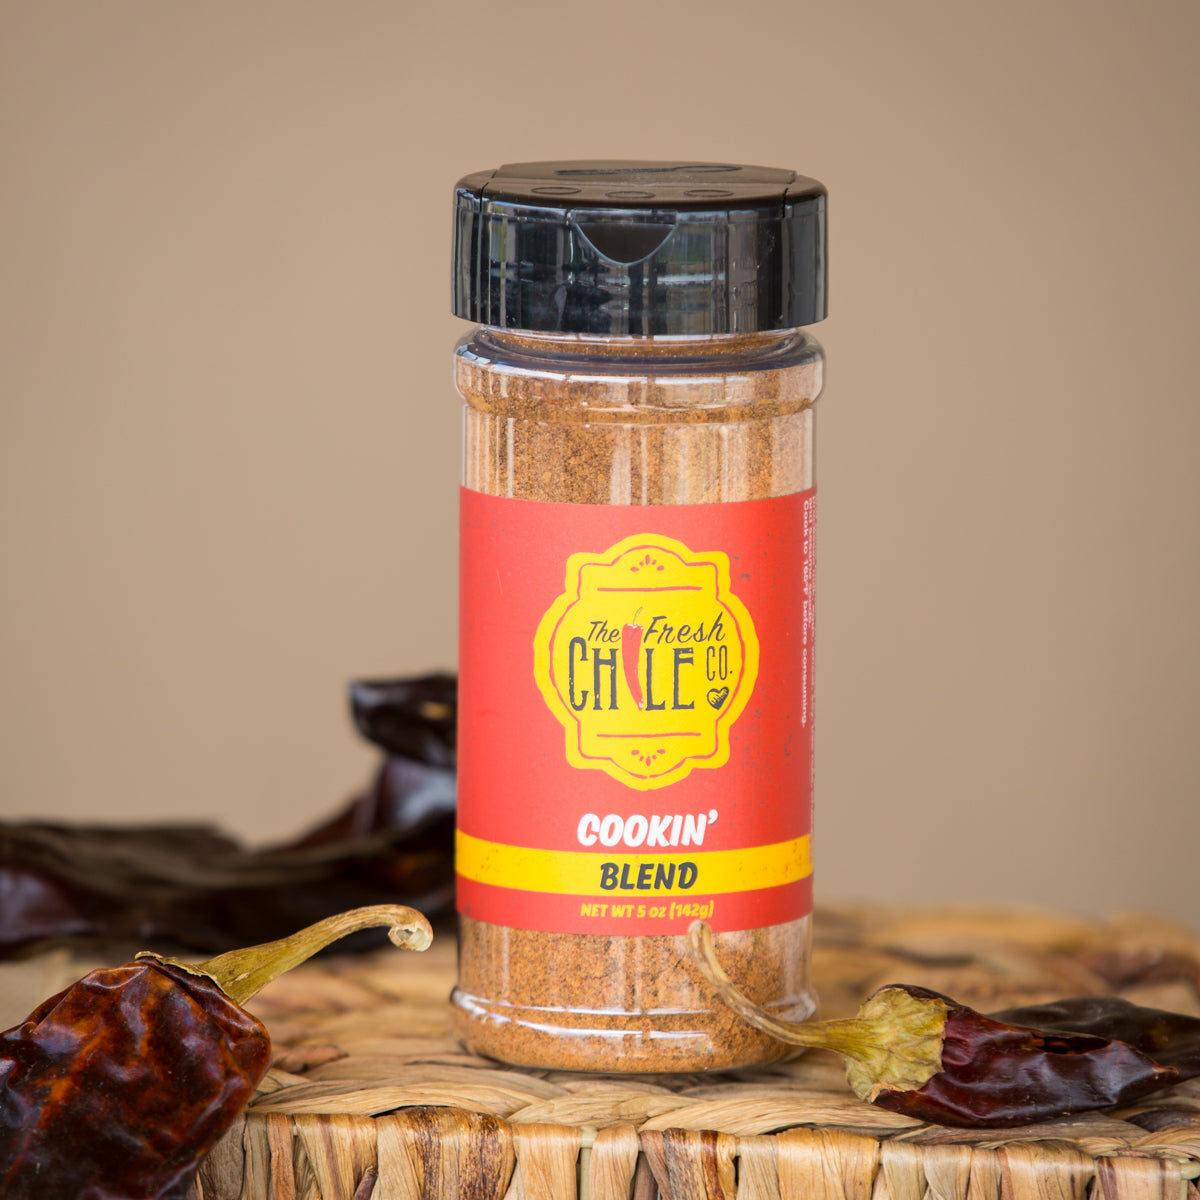 A jar of Cookin' Blend seasoning by "the fresh chile co.", surrounded by dried chile peppers, on a beige background. The label is red with bold yellow text.